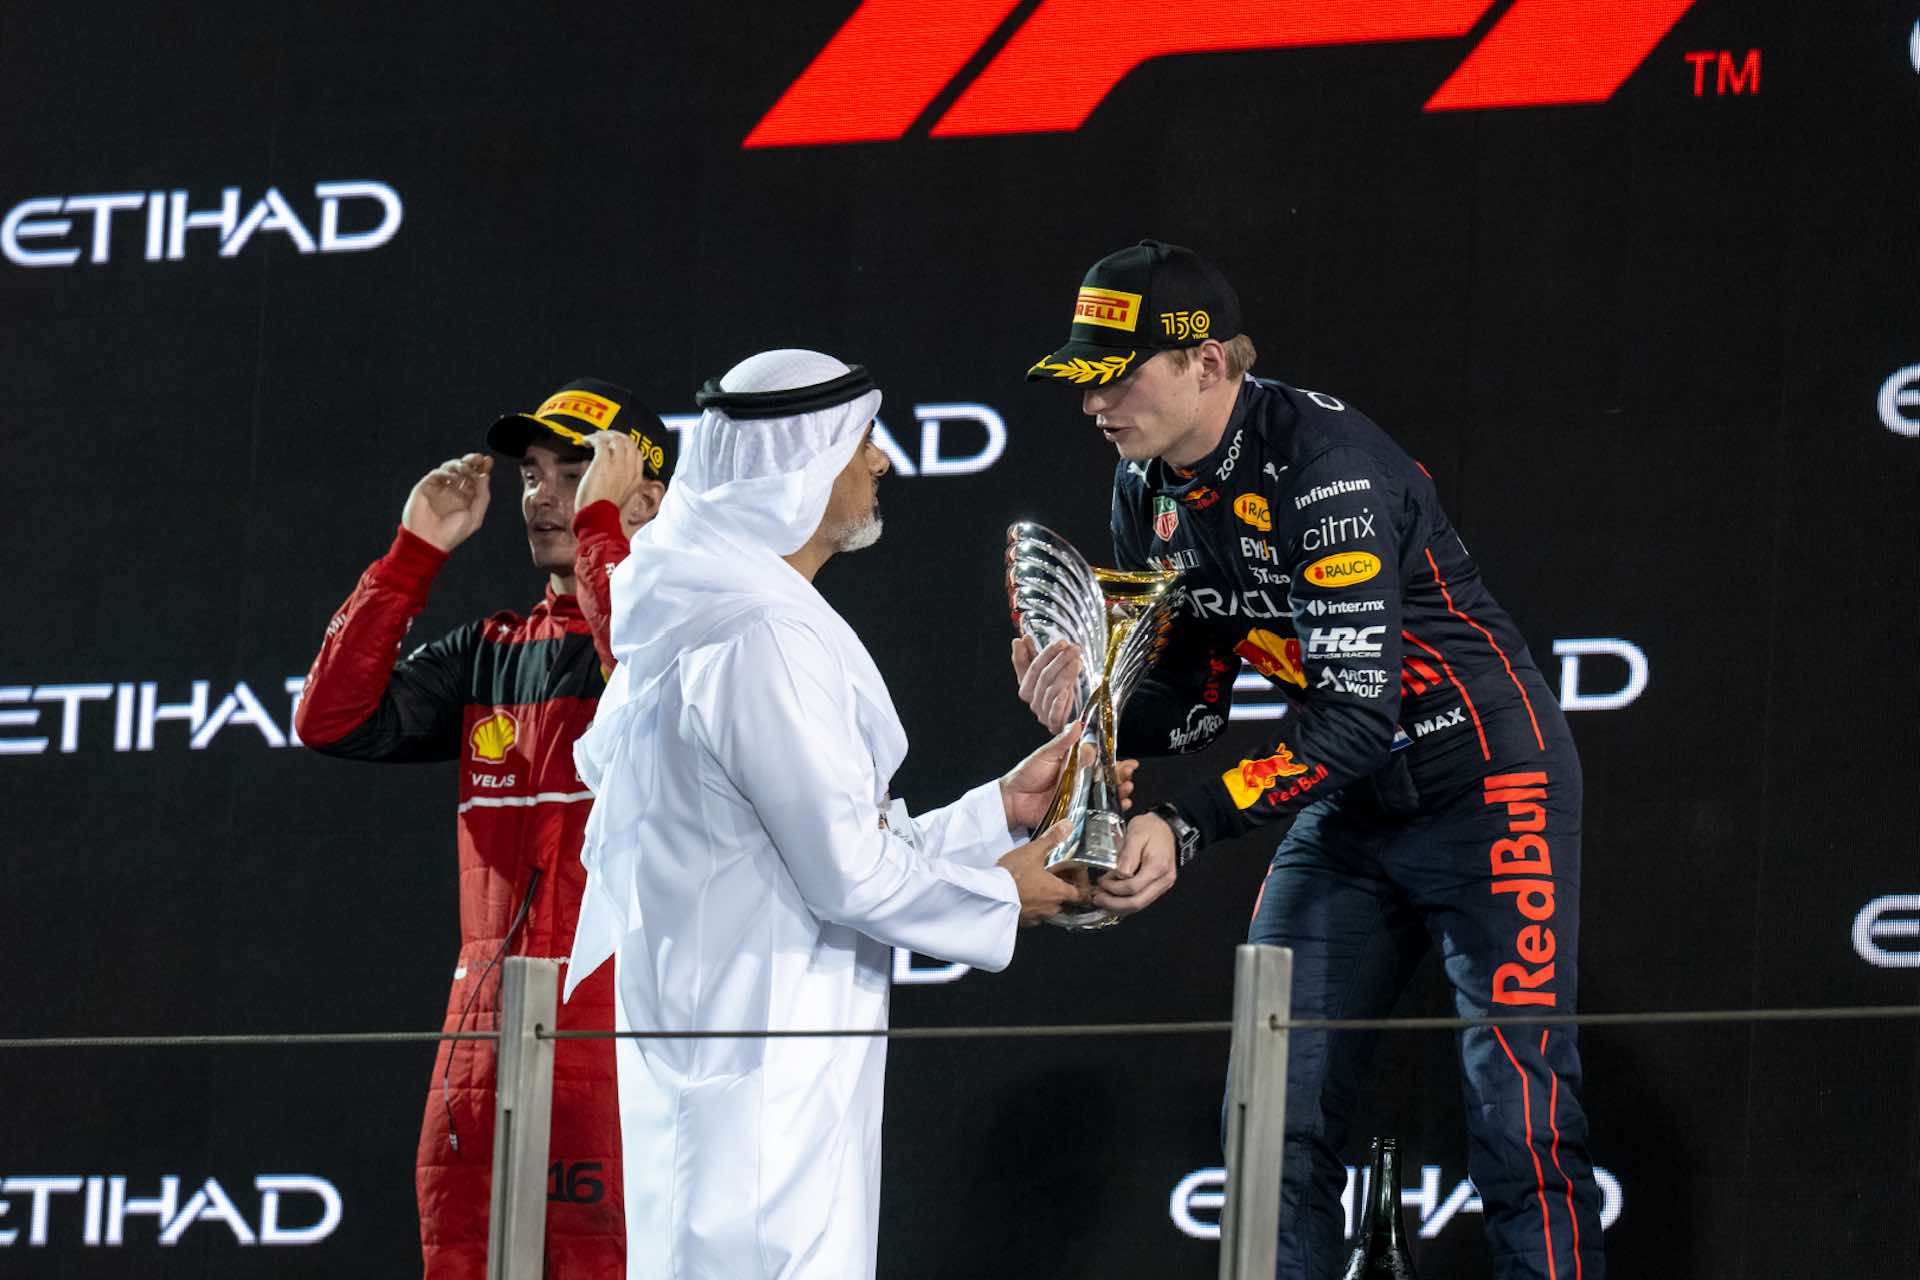 With his 15th win, Max Verstappen finished the F1 season on top